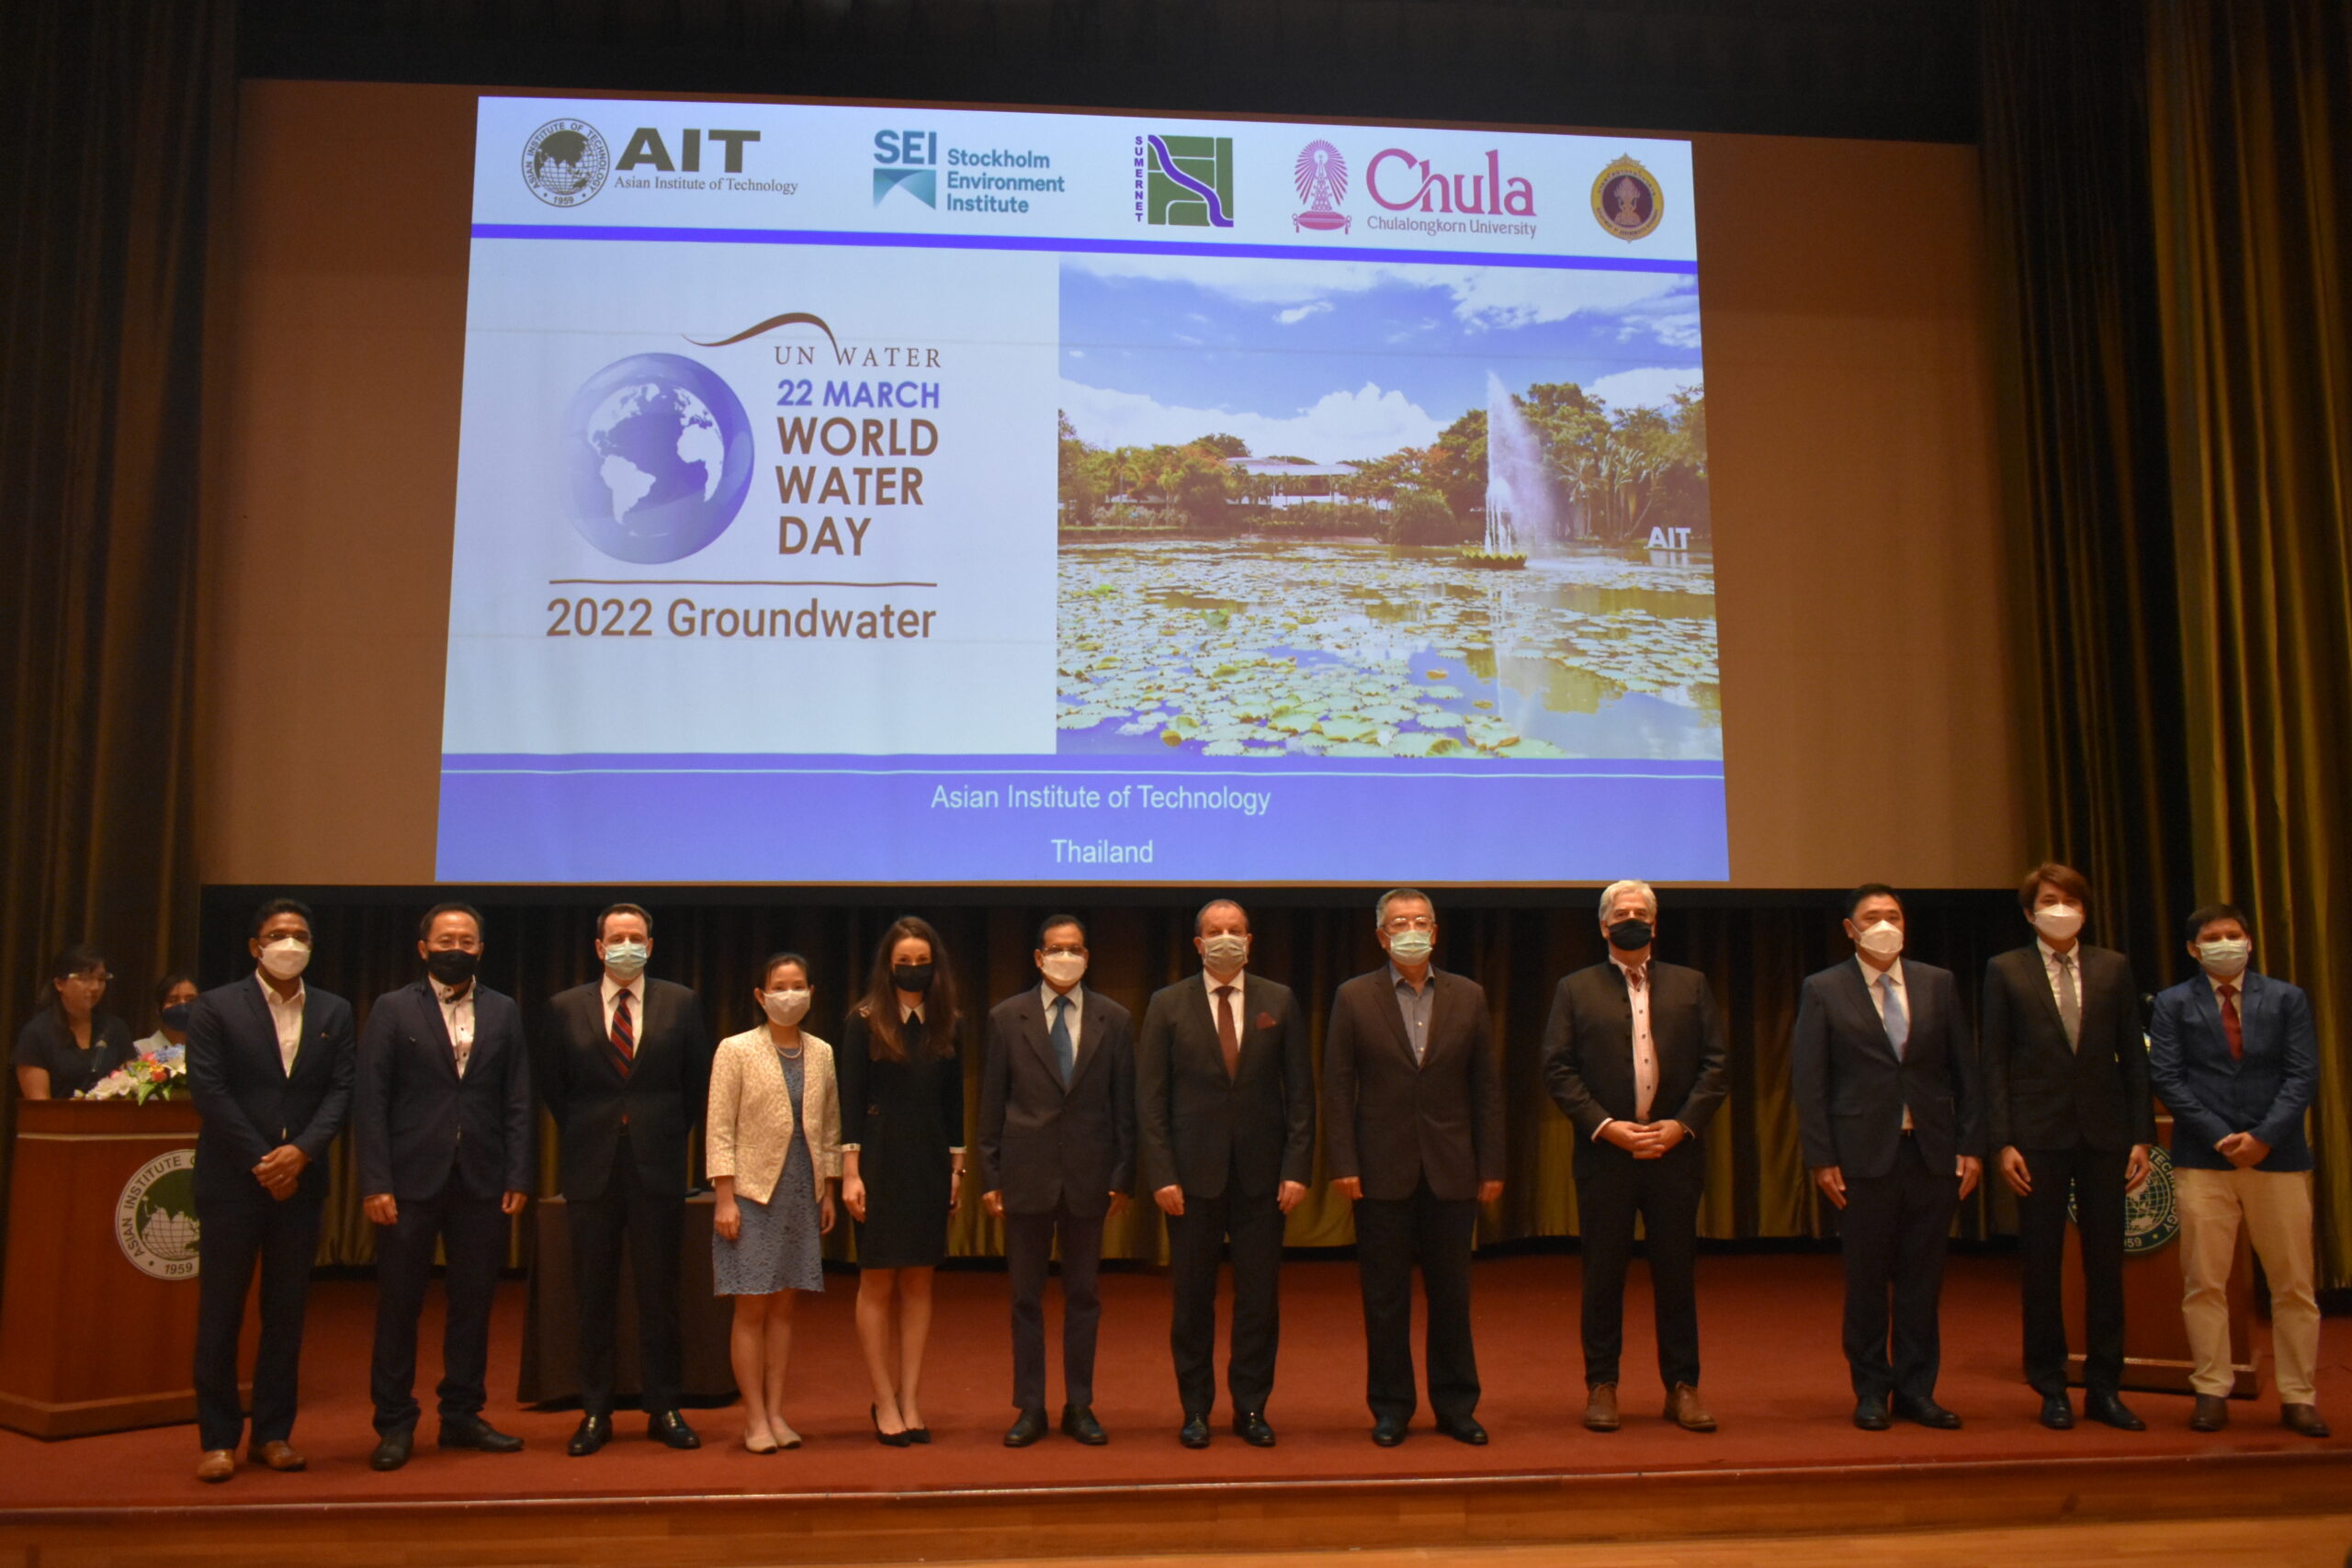 AIT and partners make groundwater visible through celebration of World Water Day 2022